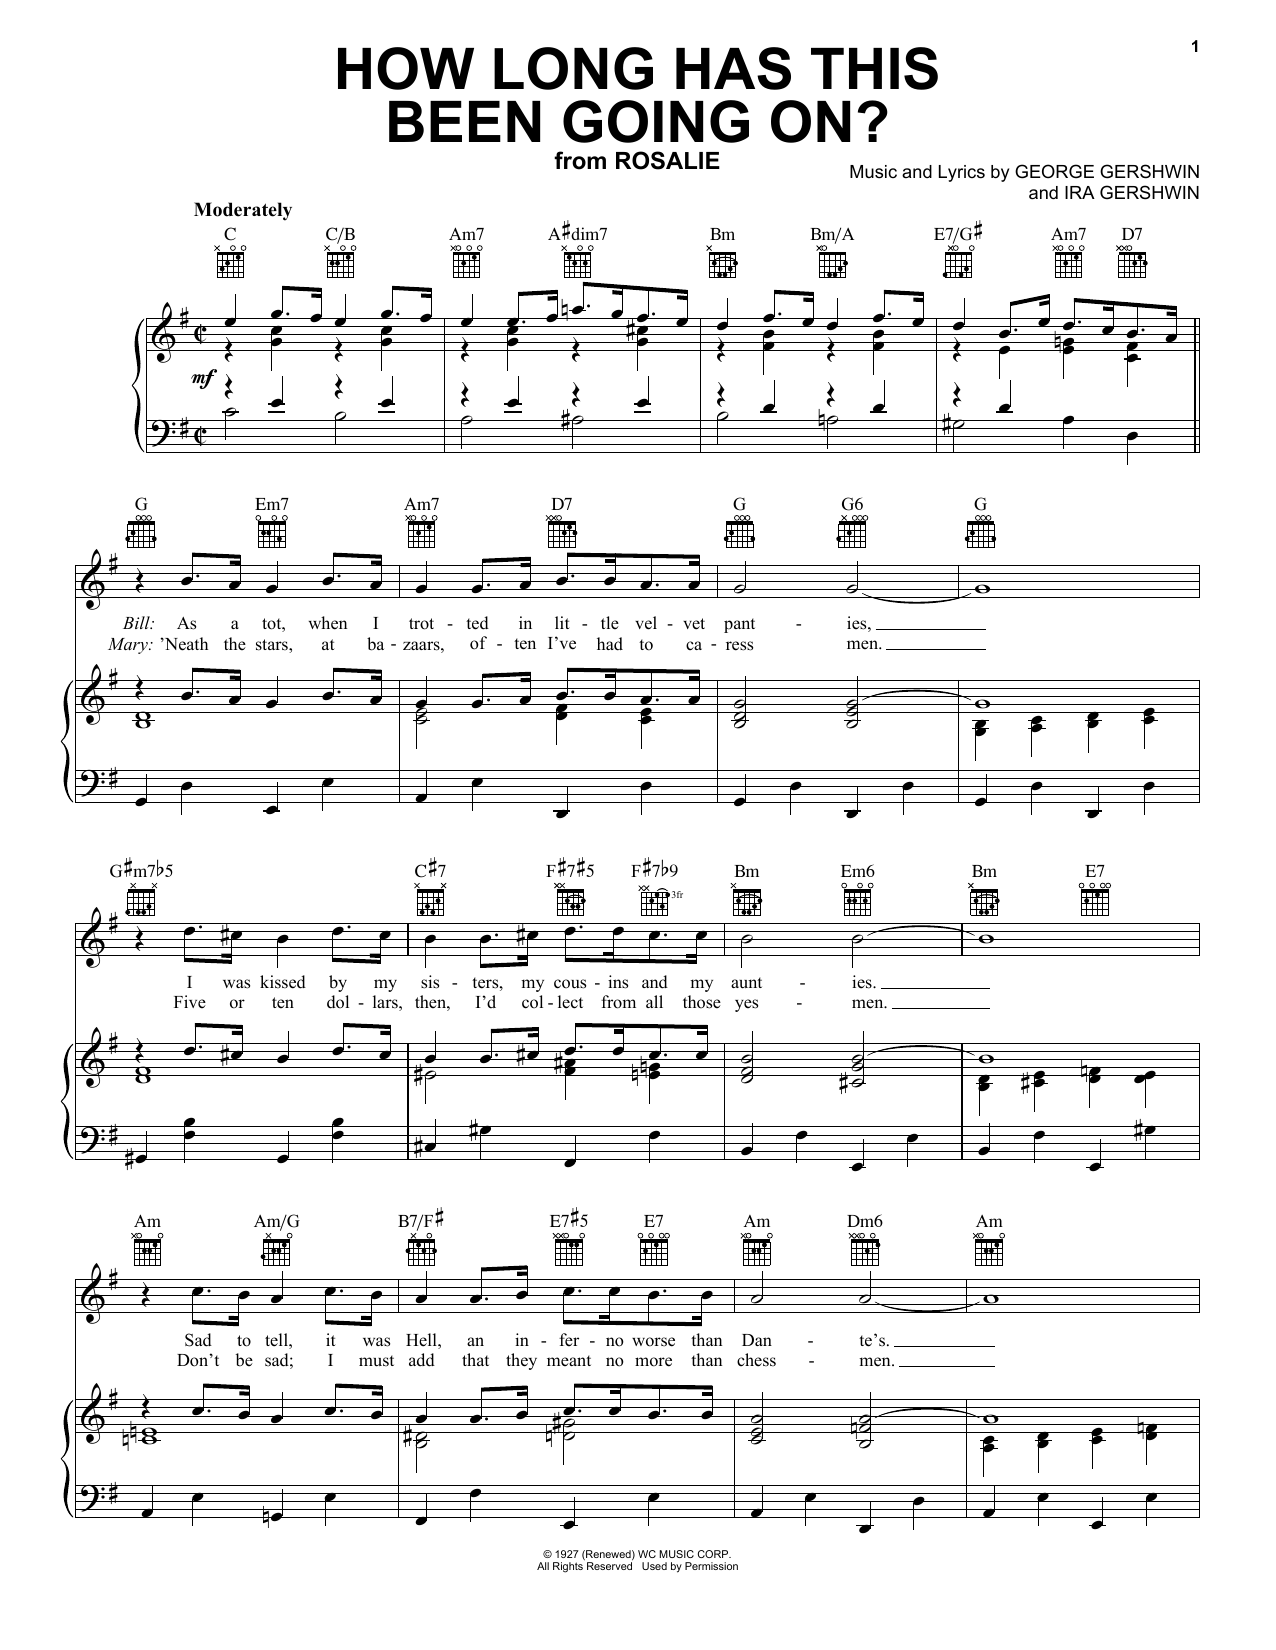 Download Ira Gershwin How Long Has This Been Going On? Sheet Music